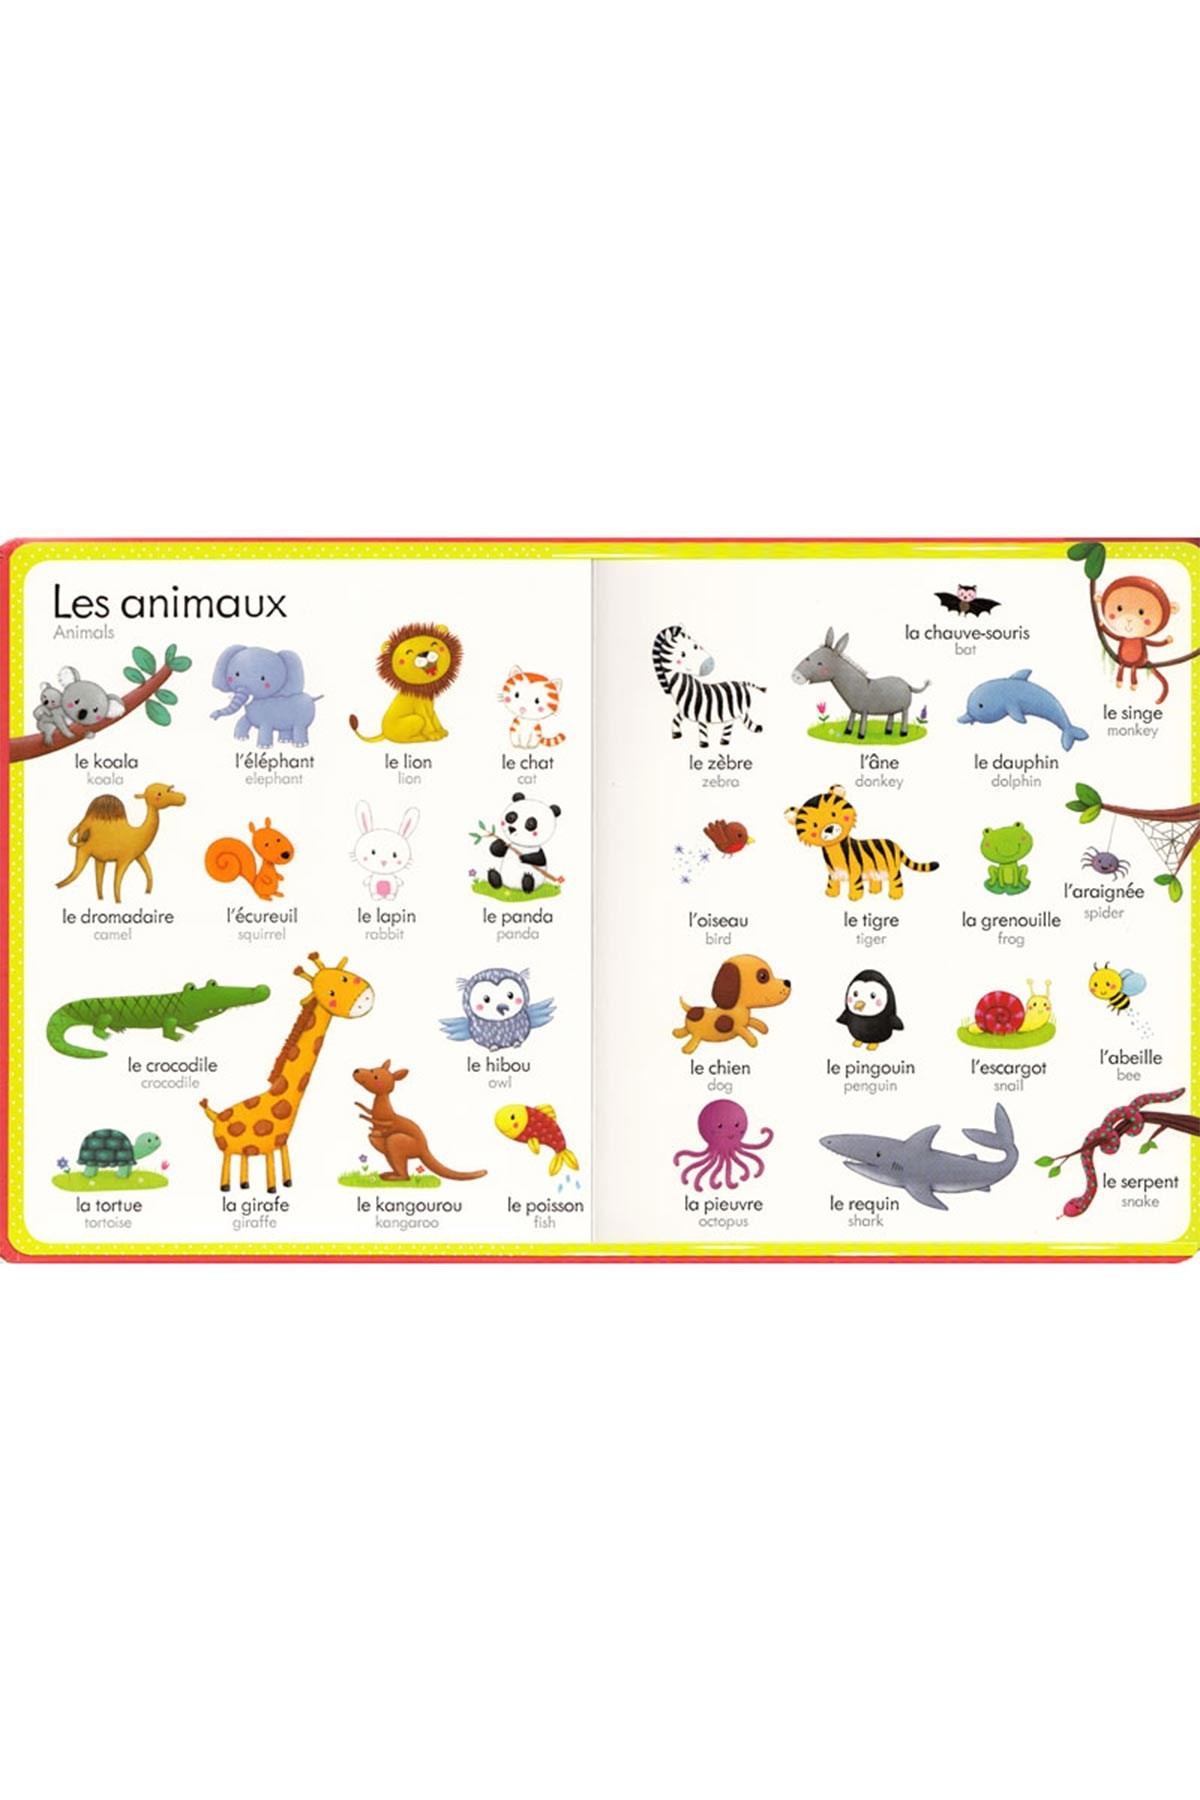 The Usborne My First French Word Book